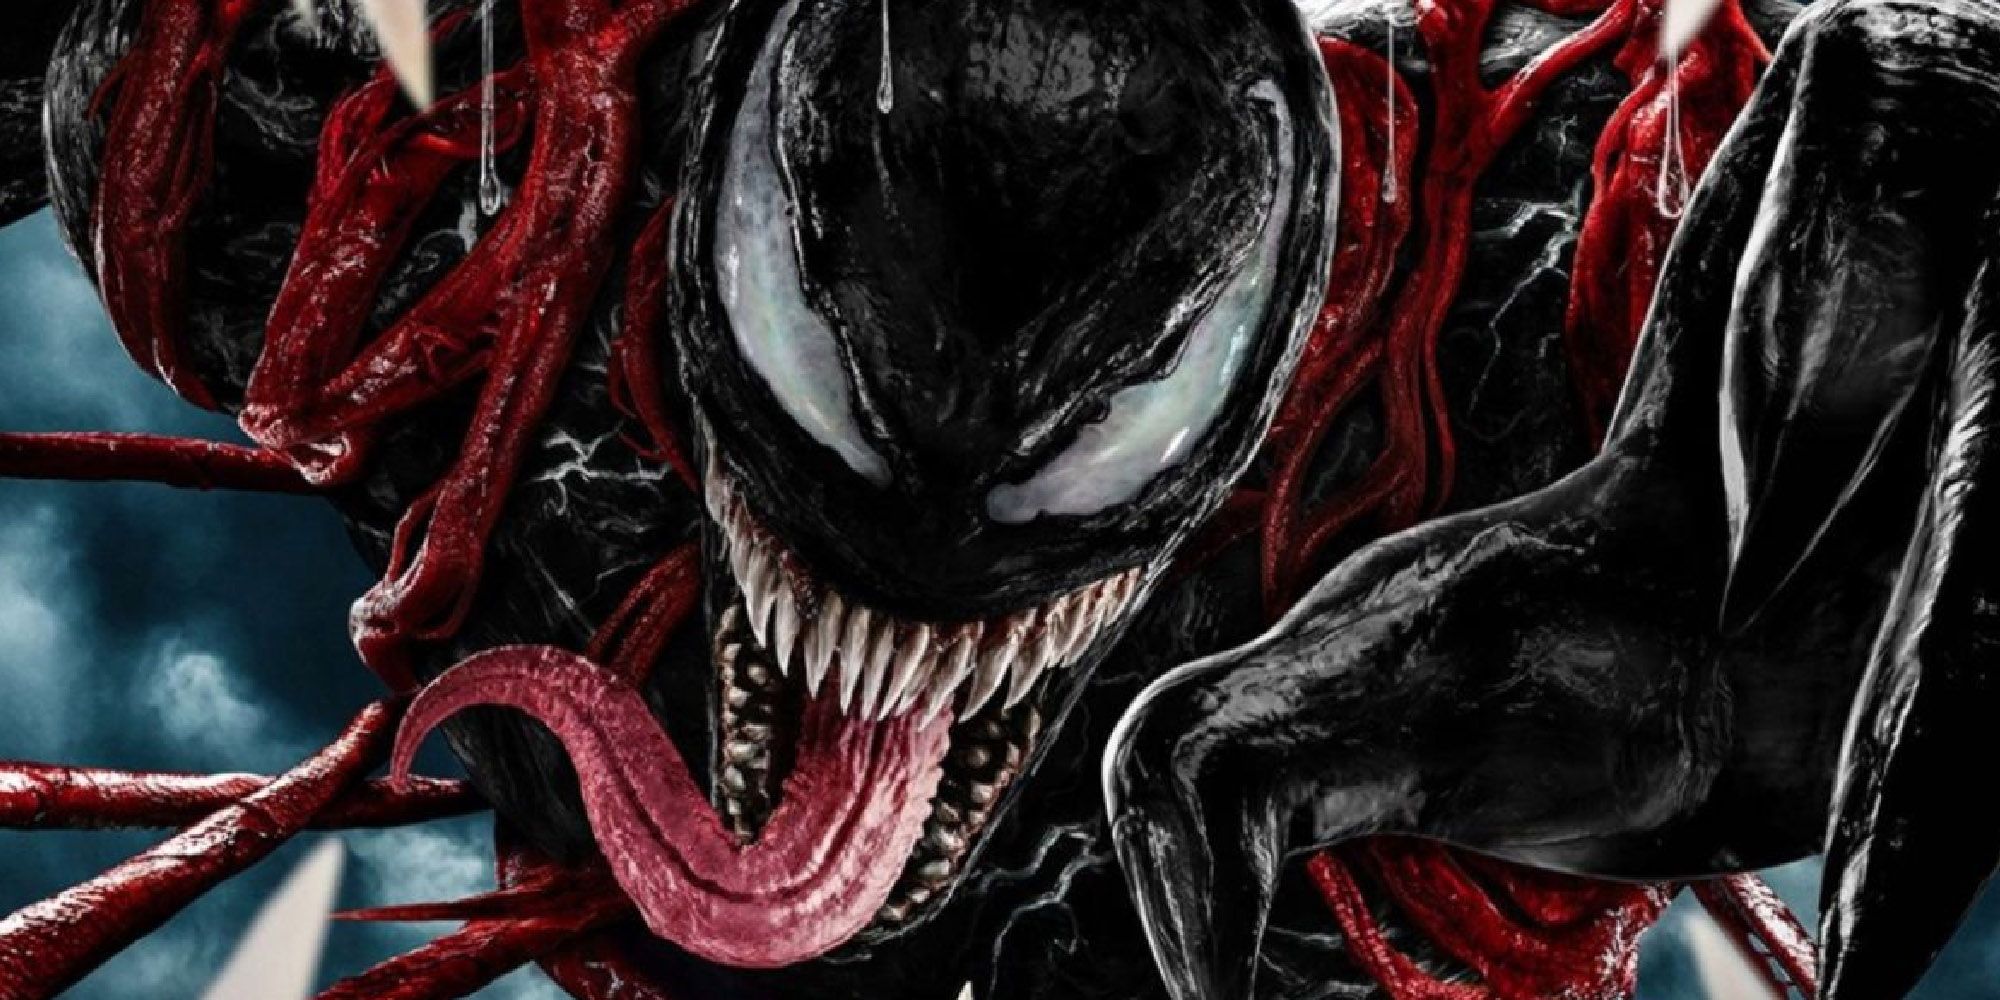 Venom wrapped in Carnage's red tendrils, lunging toward the camera with his tongue out